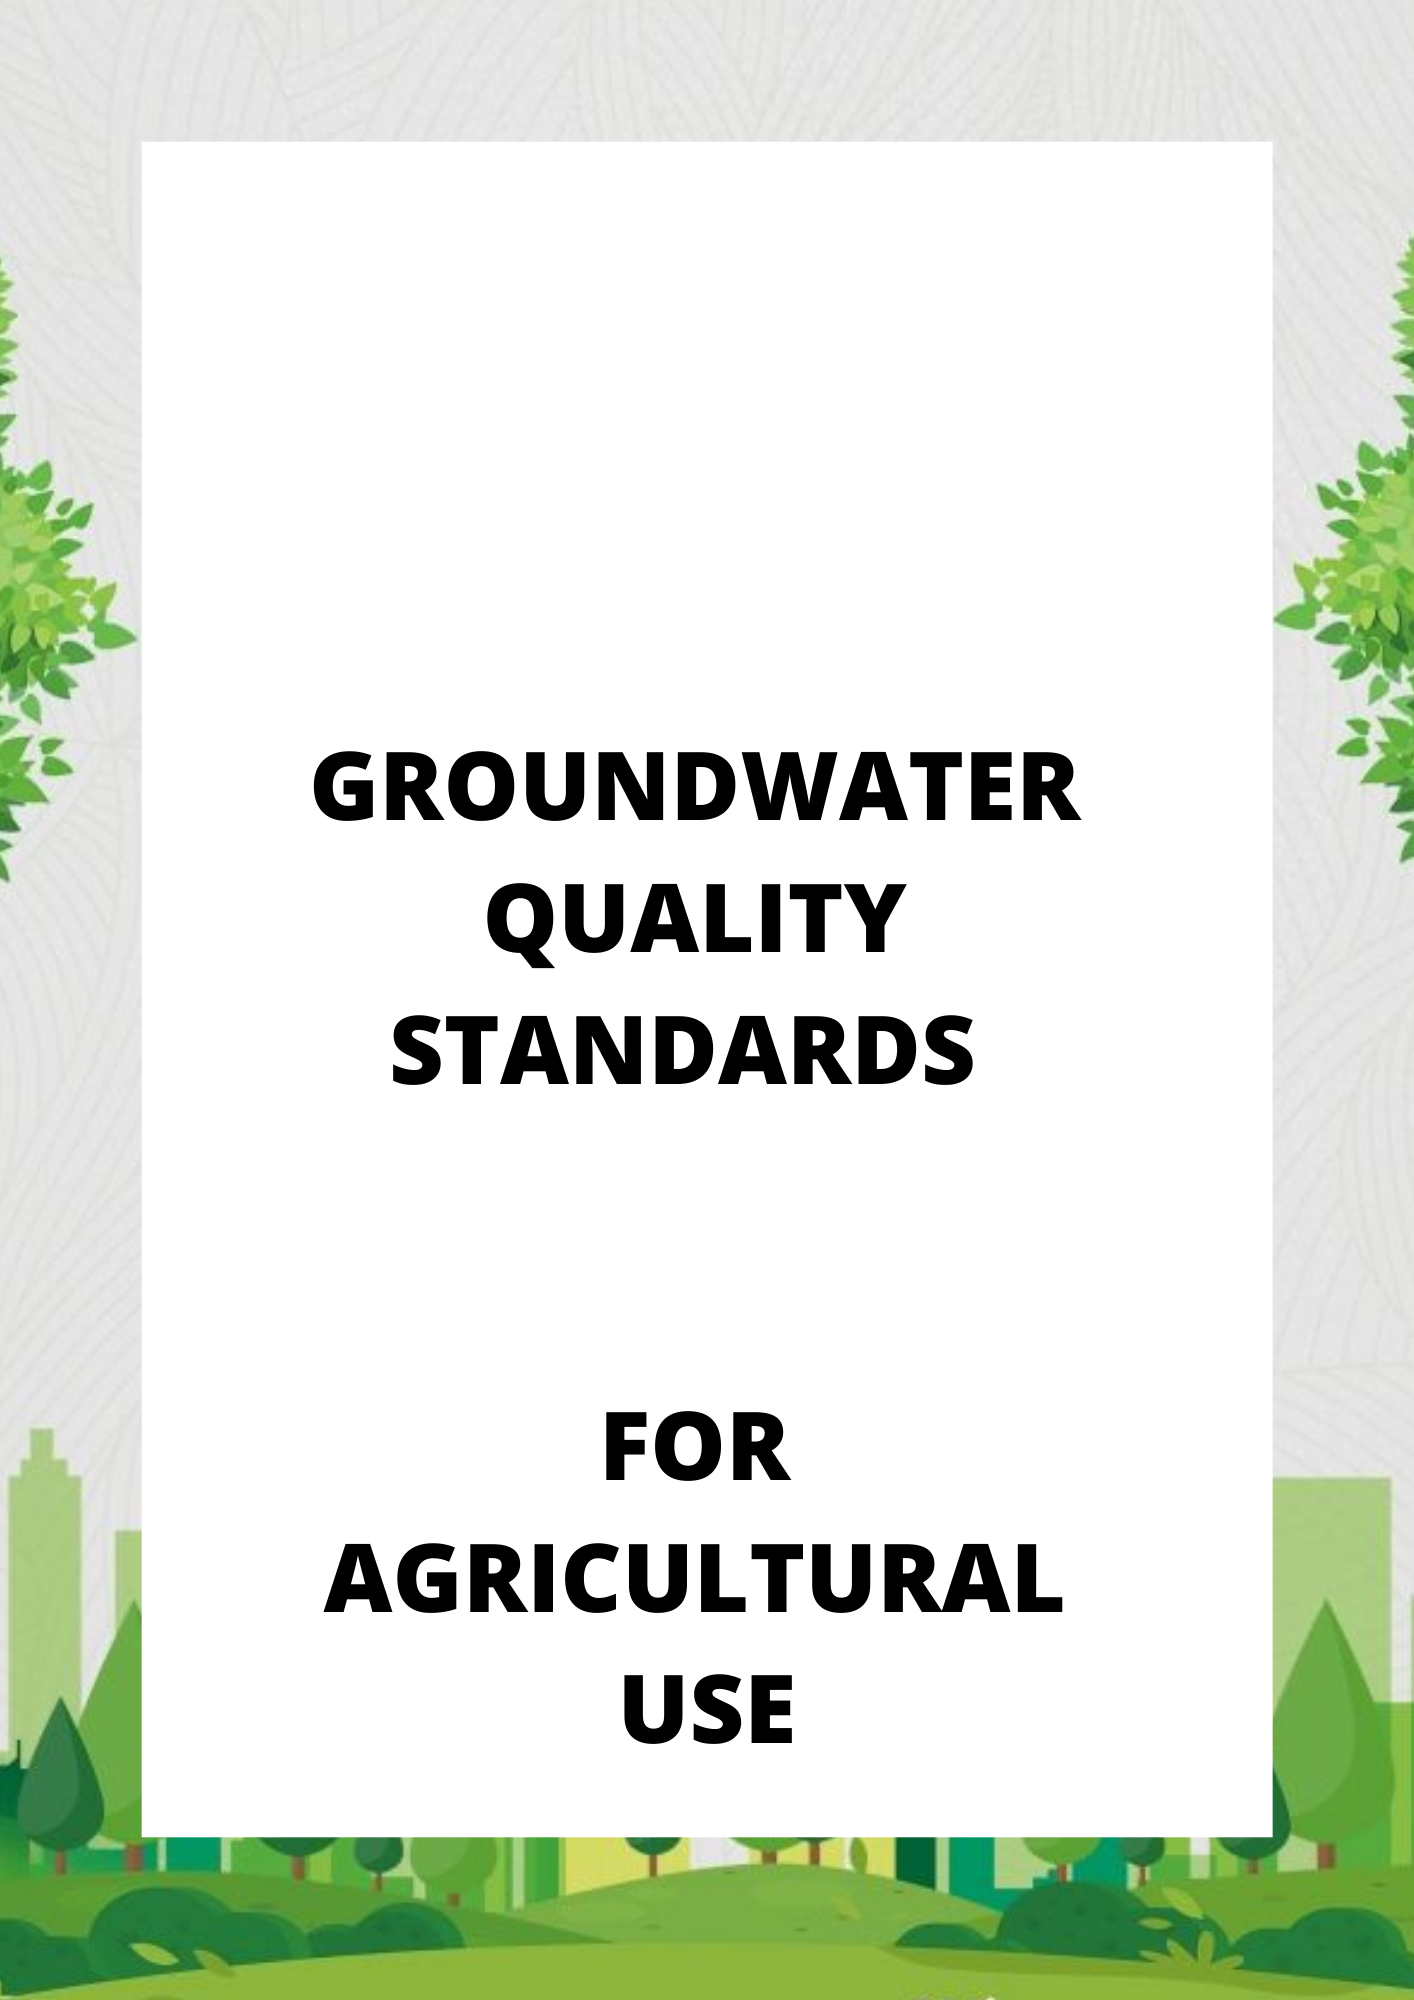 GROUNDWATER QUALITY STANDARDS - FOR AGRICULTURAL USE